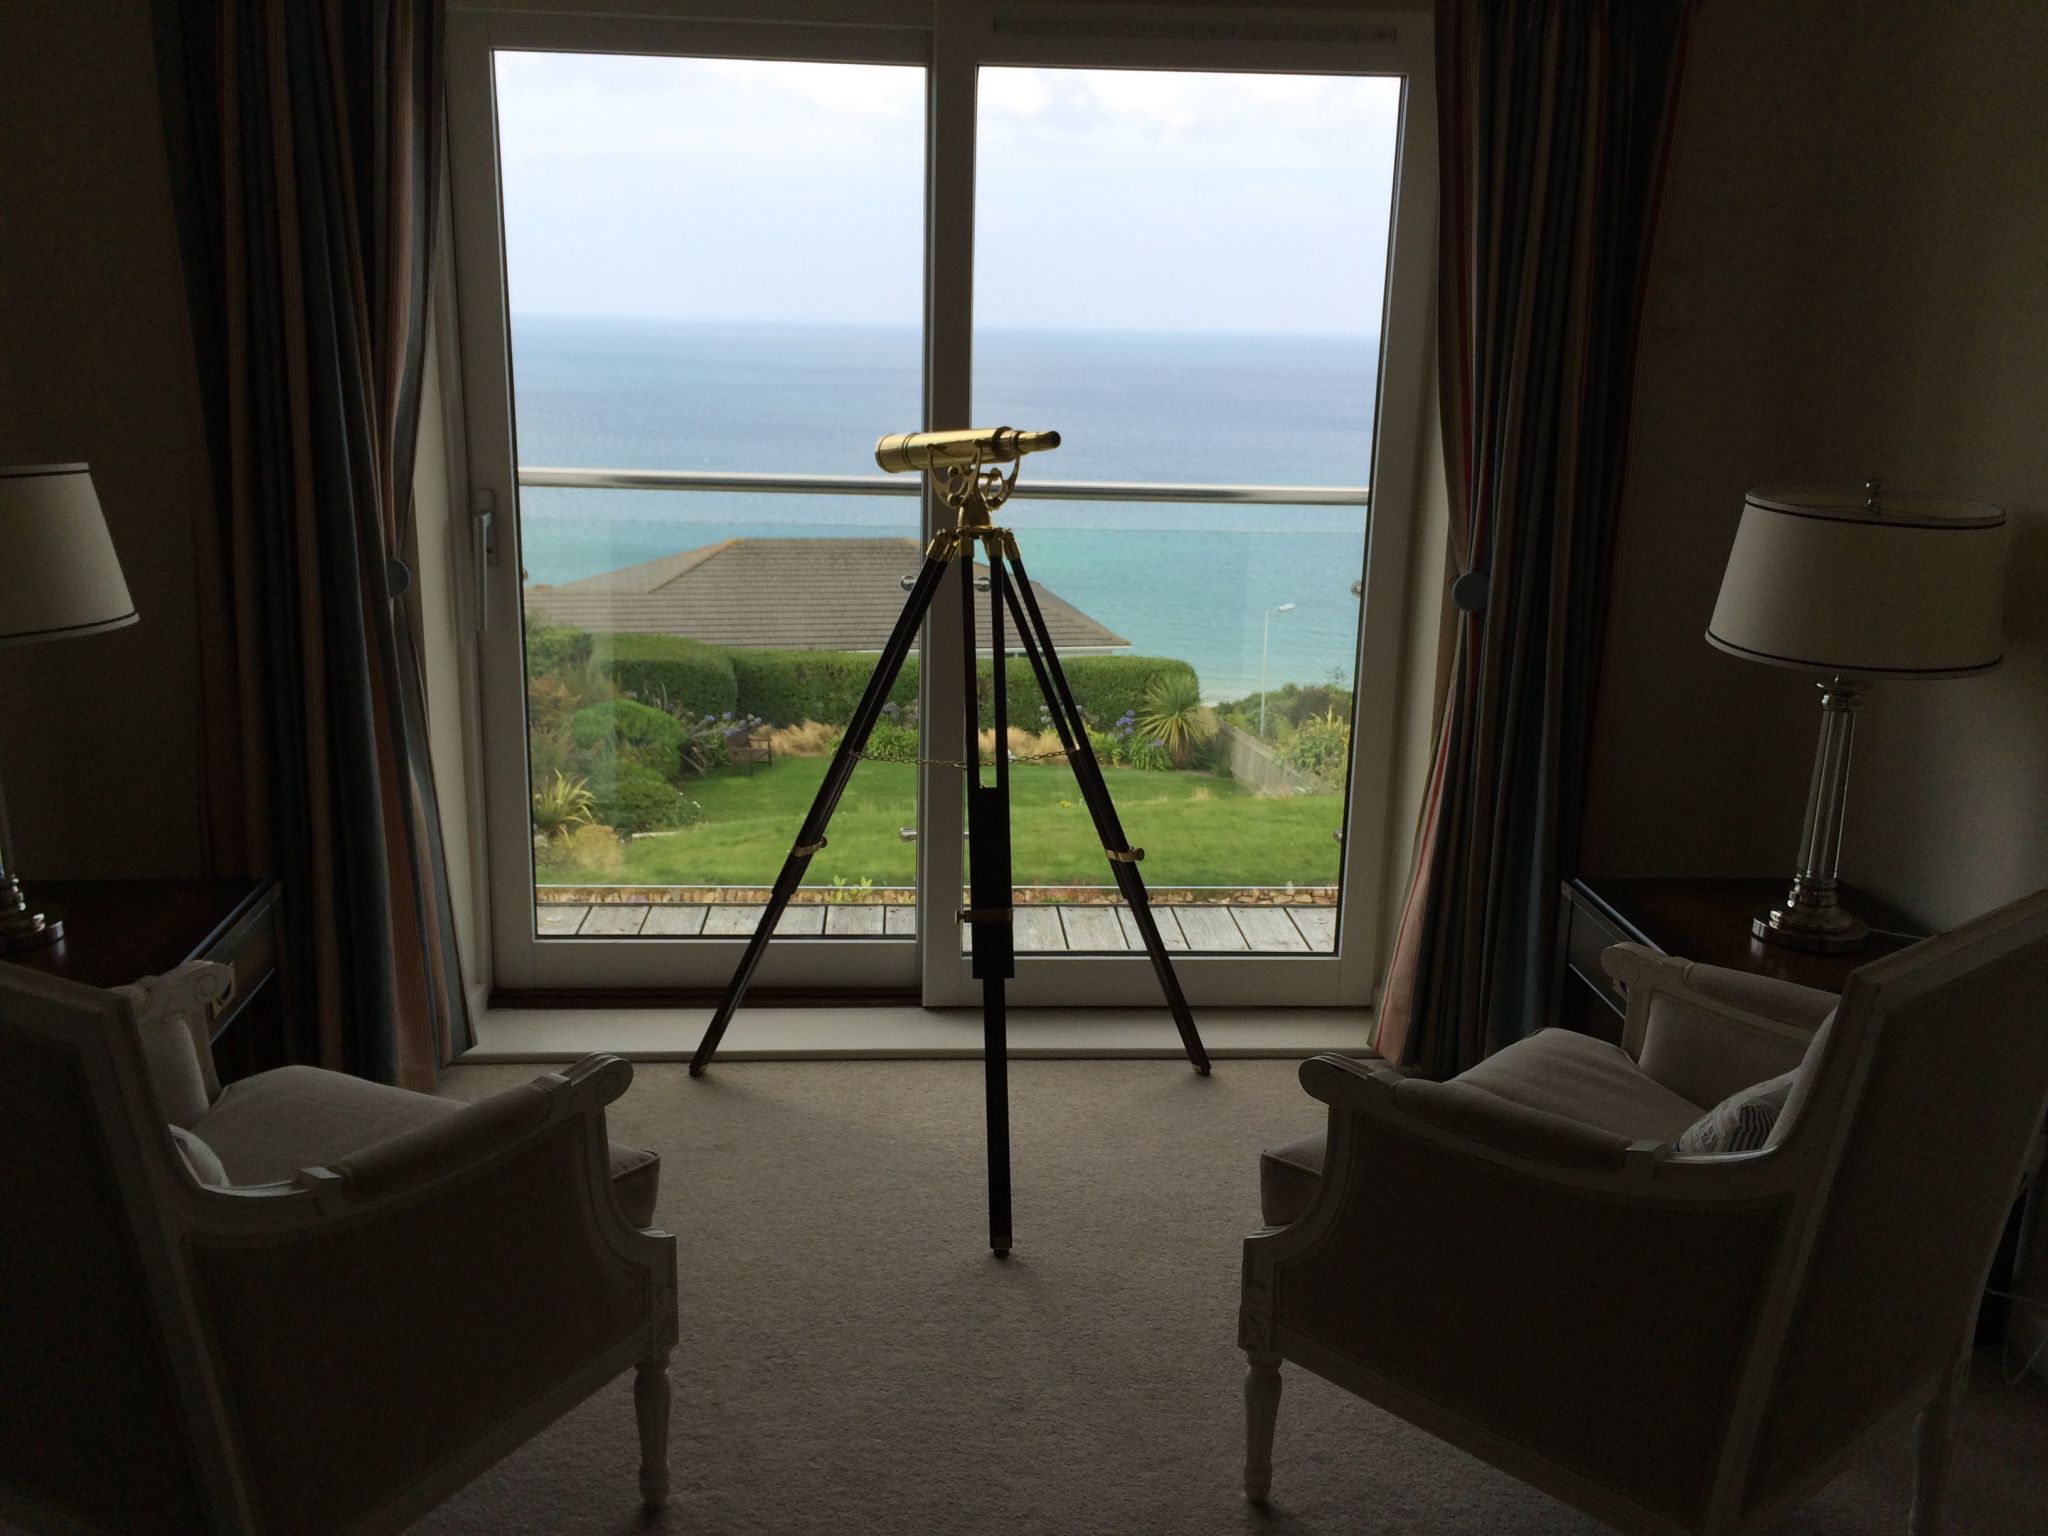 Telescope for viewing Carbis Bay, Cornwall